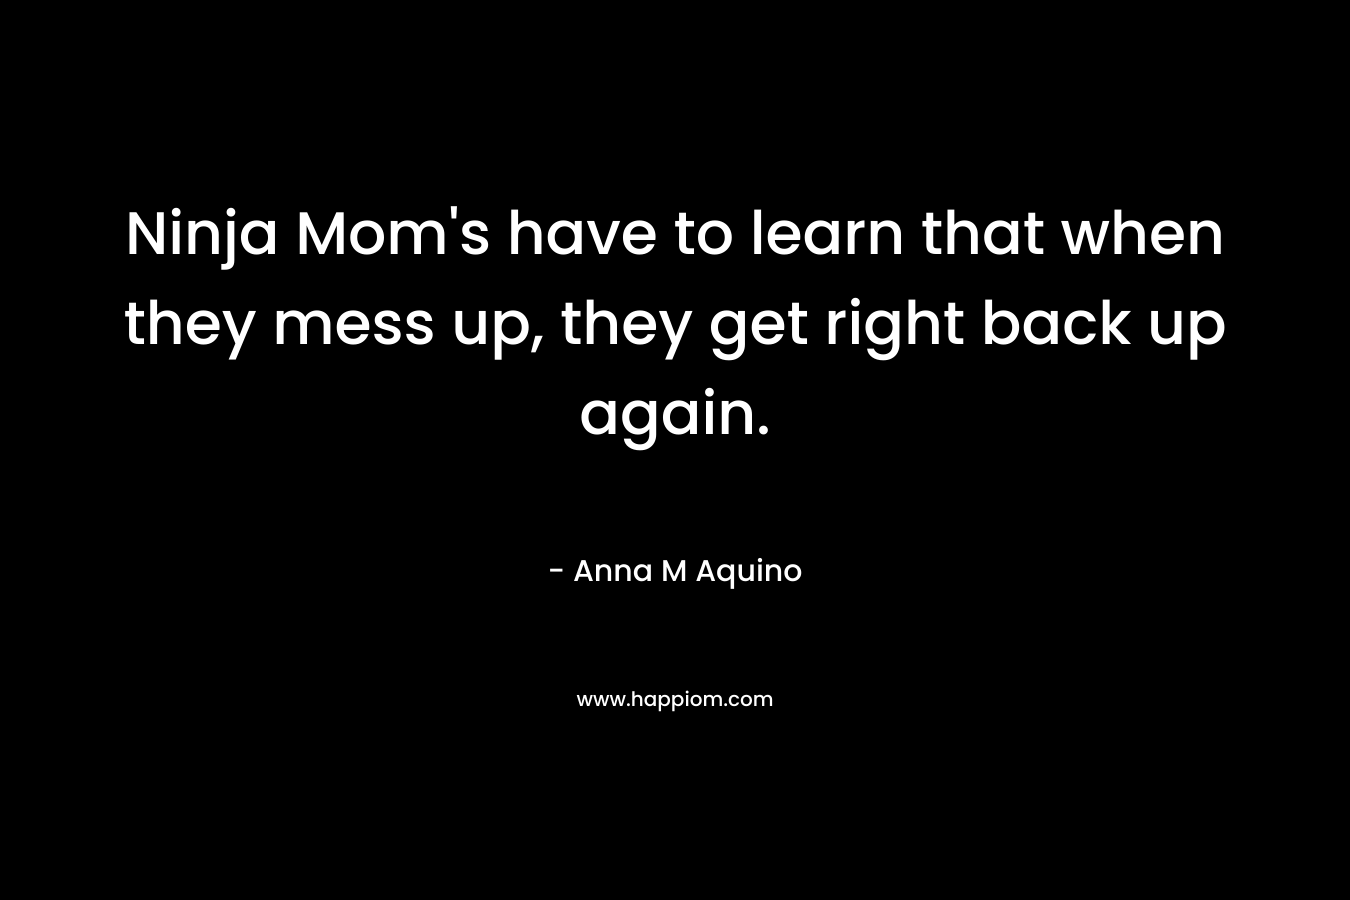 Ninja Mom's have to learn that when they mess up, they get right back up again.